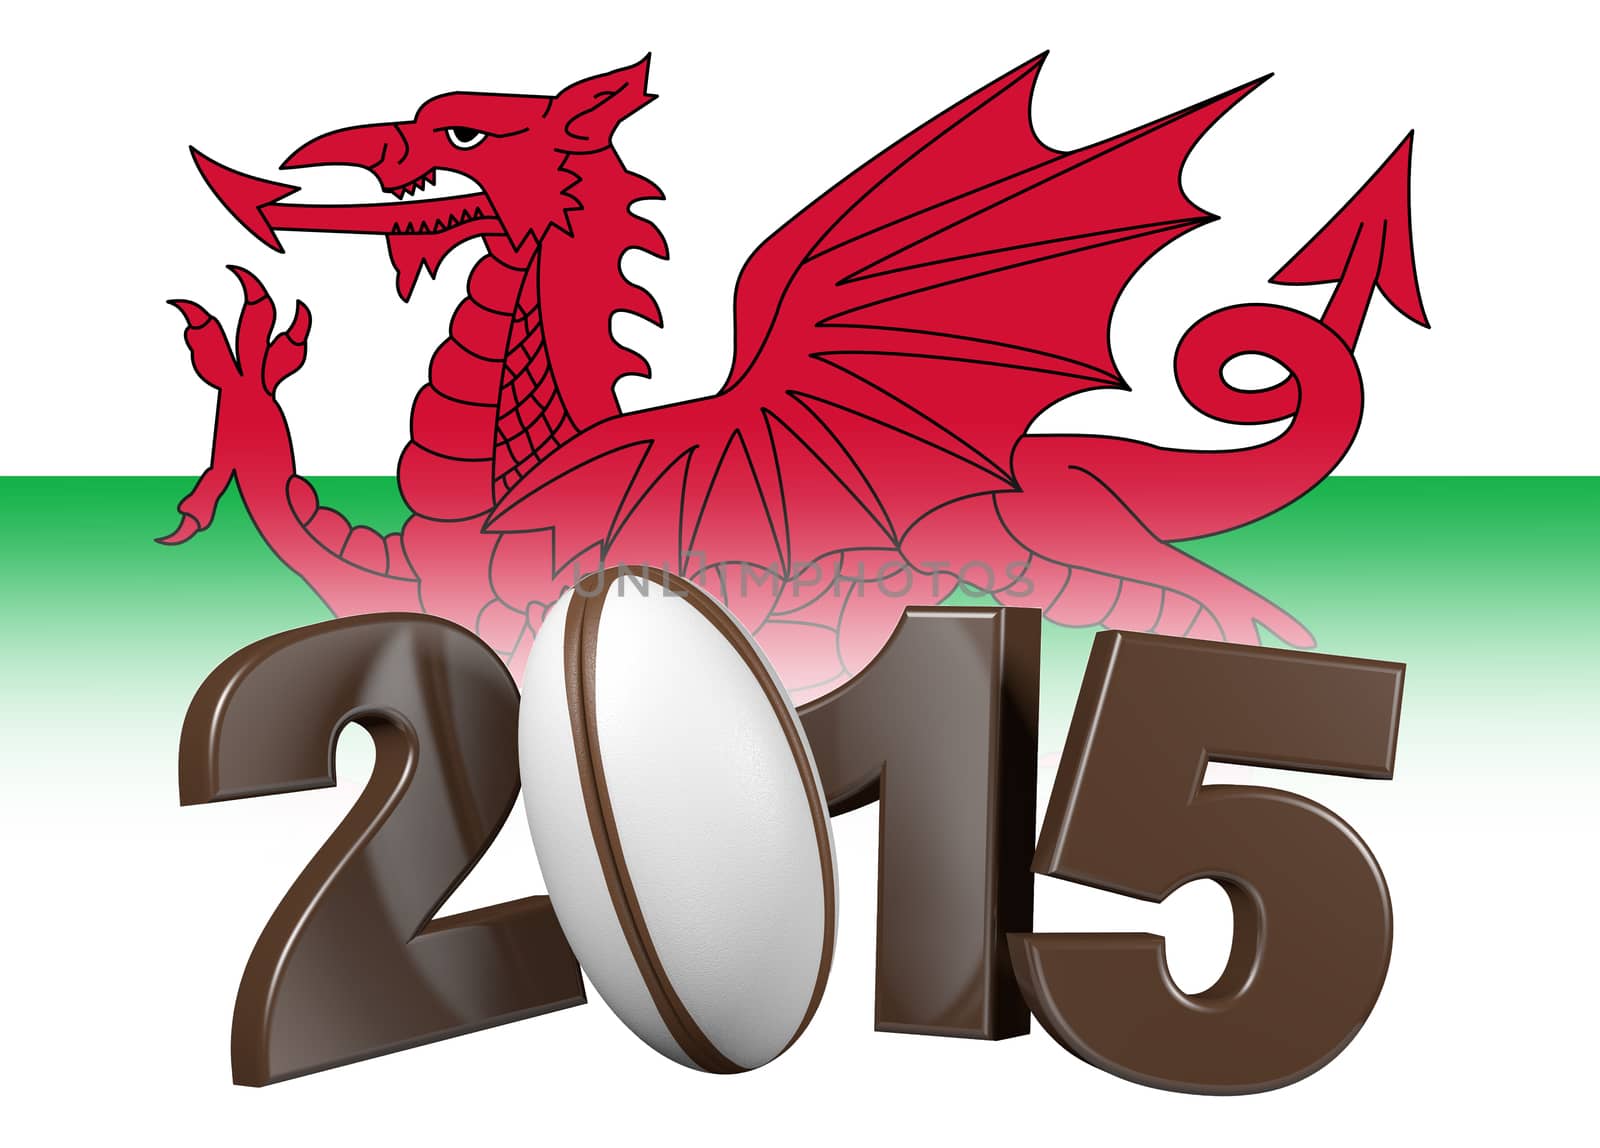 Rugby 2015 design with Wales Flag by shkyo30